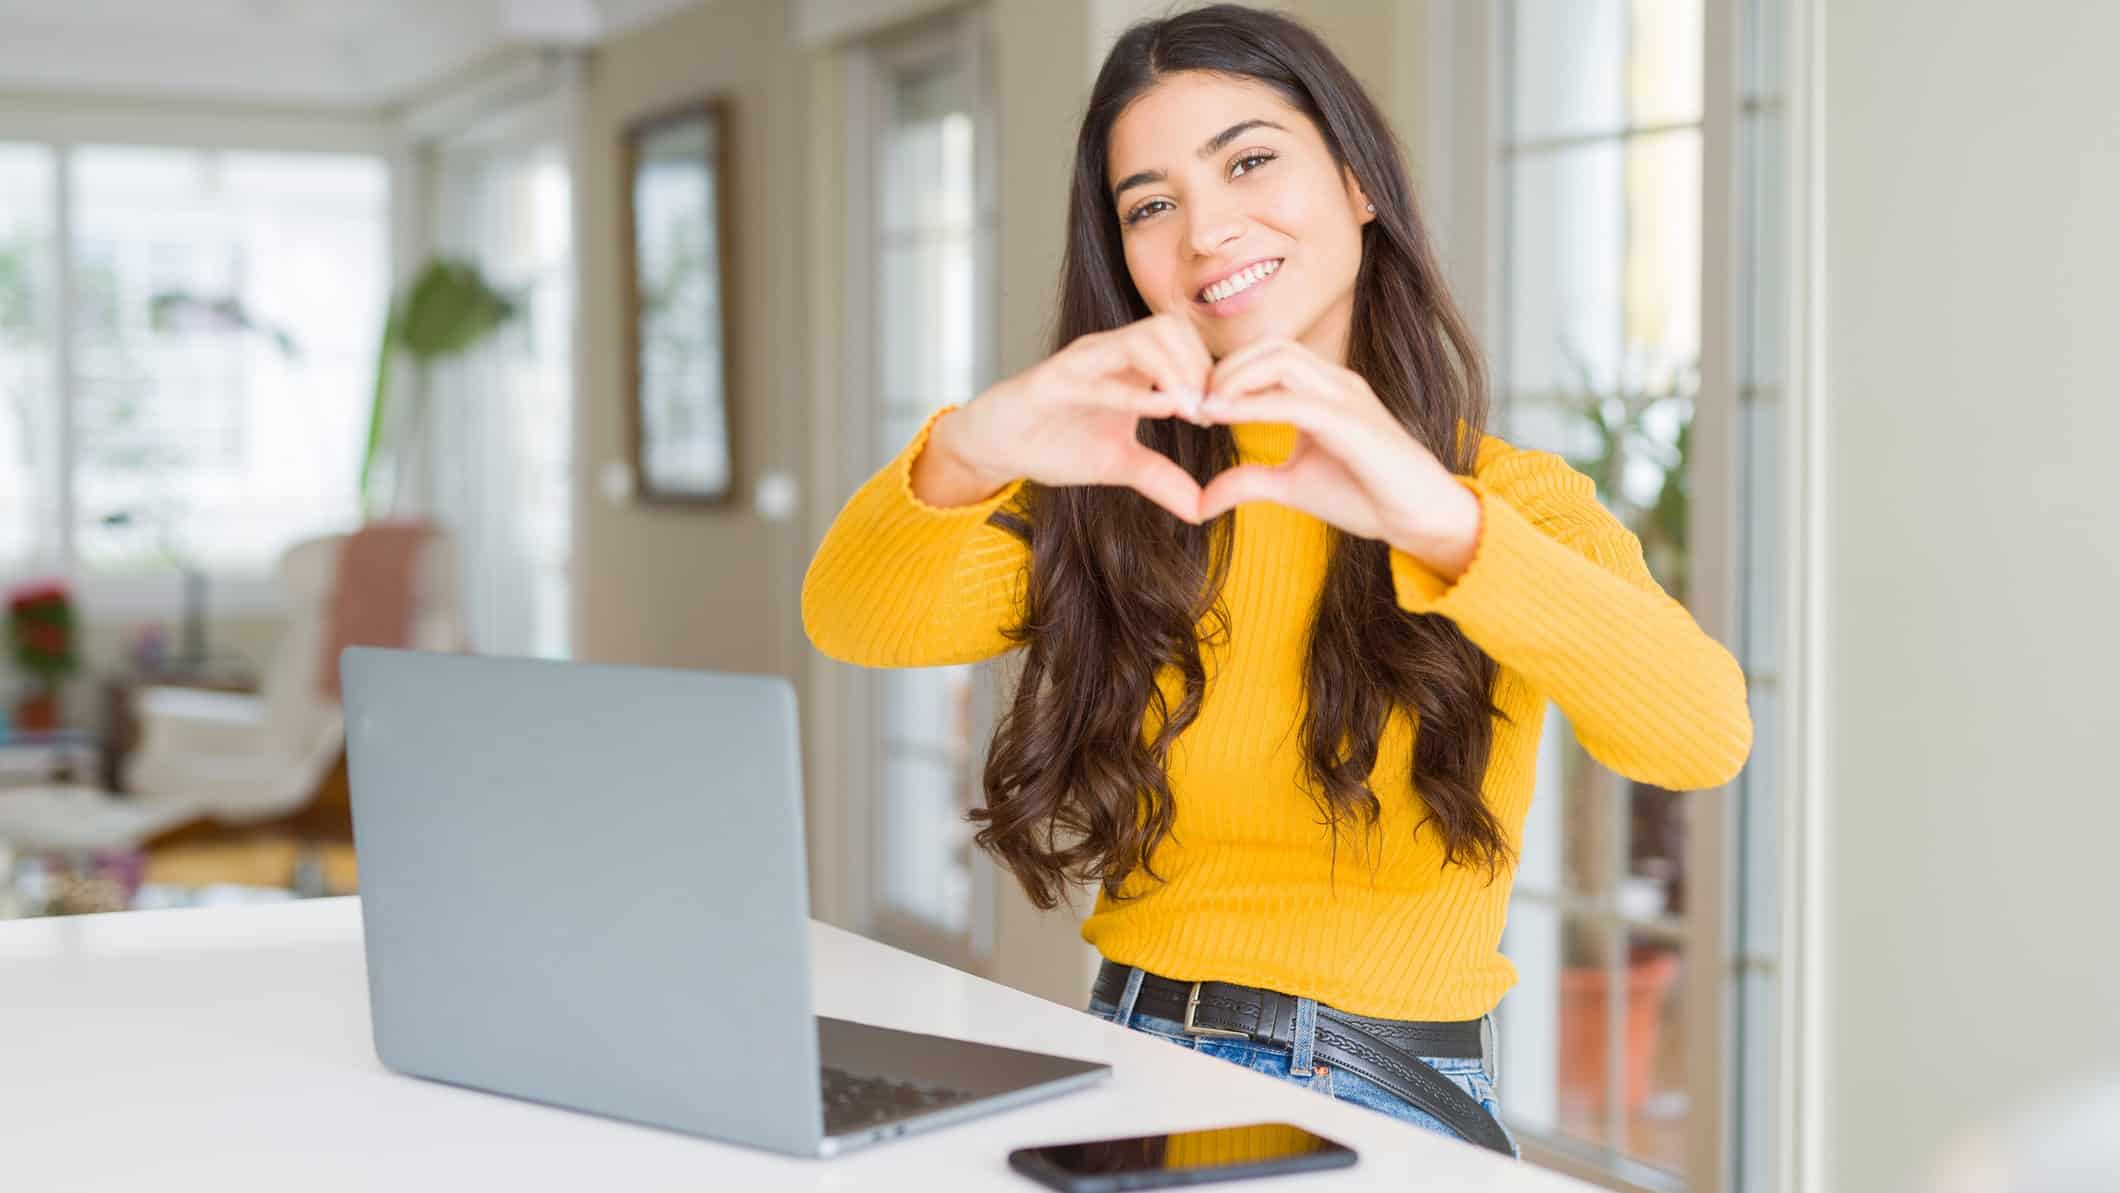 Young woman using computer laptop smiling in love showing heart symbol and shape with hands.